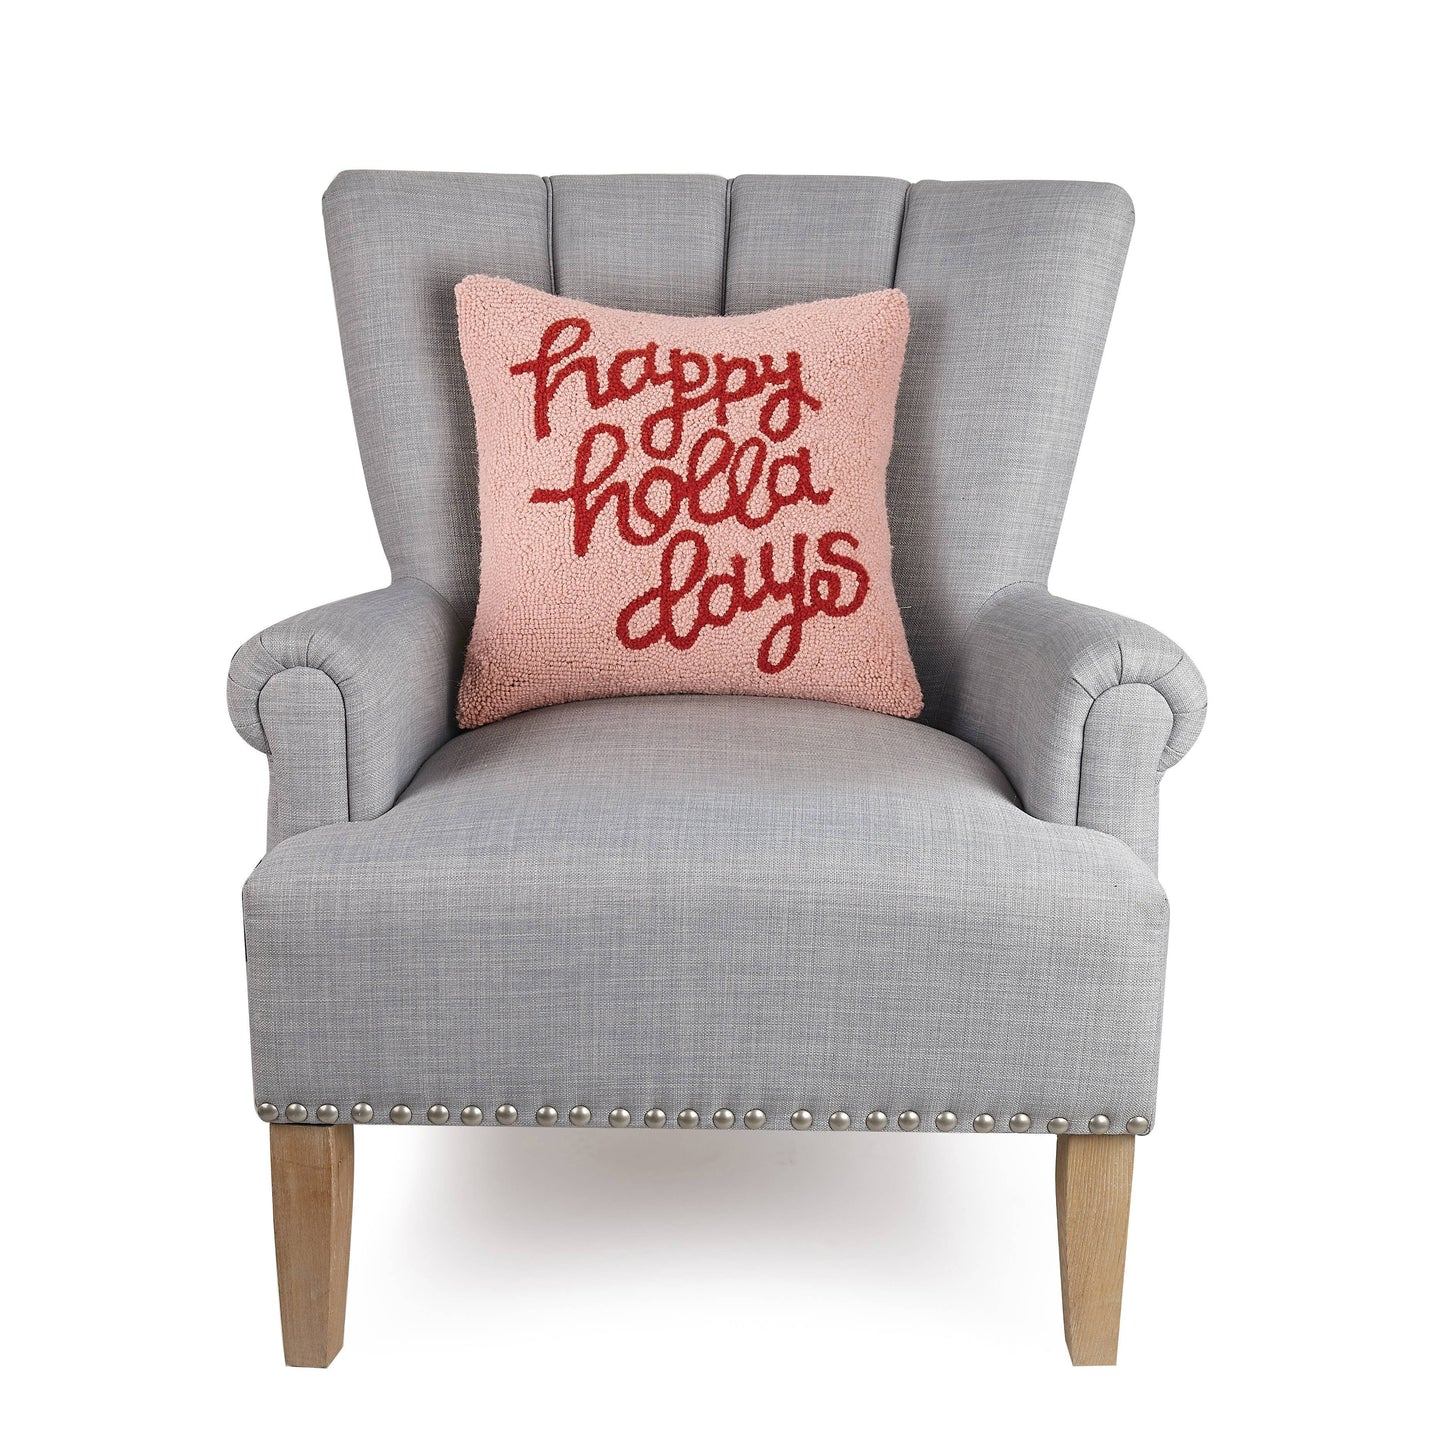 Happy Holladays Hook Pillow by Ampersand